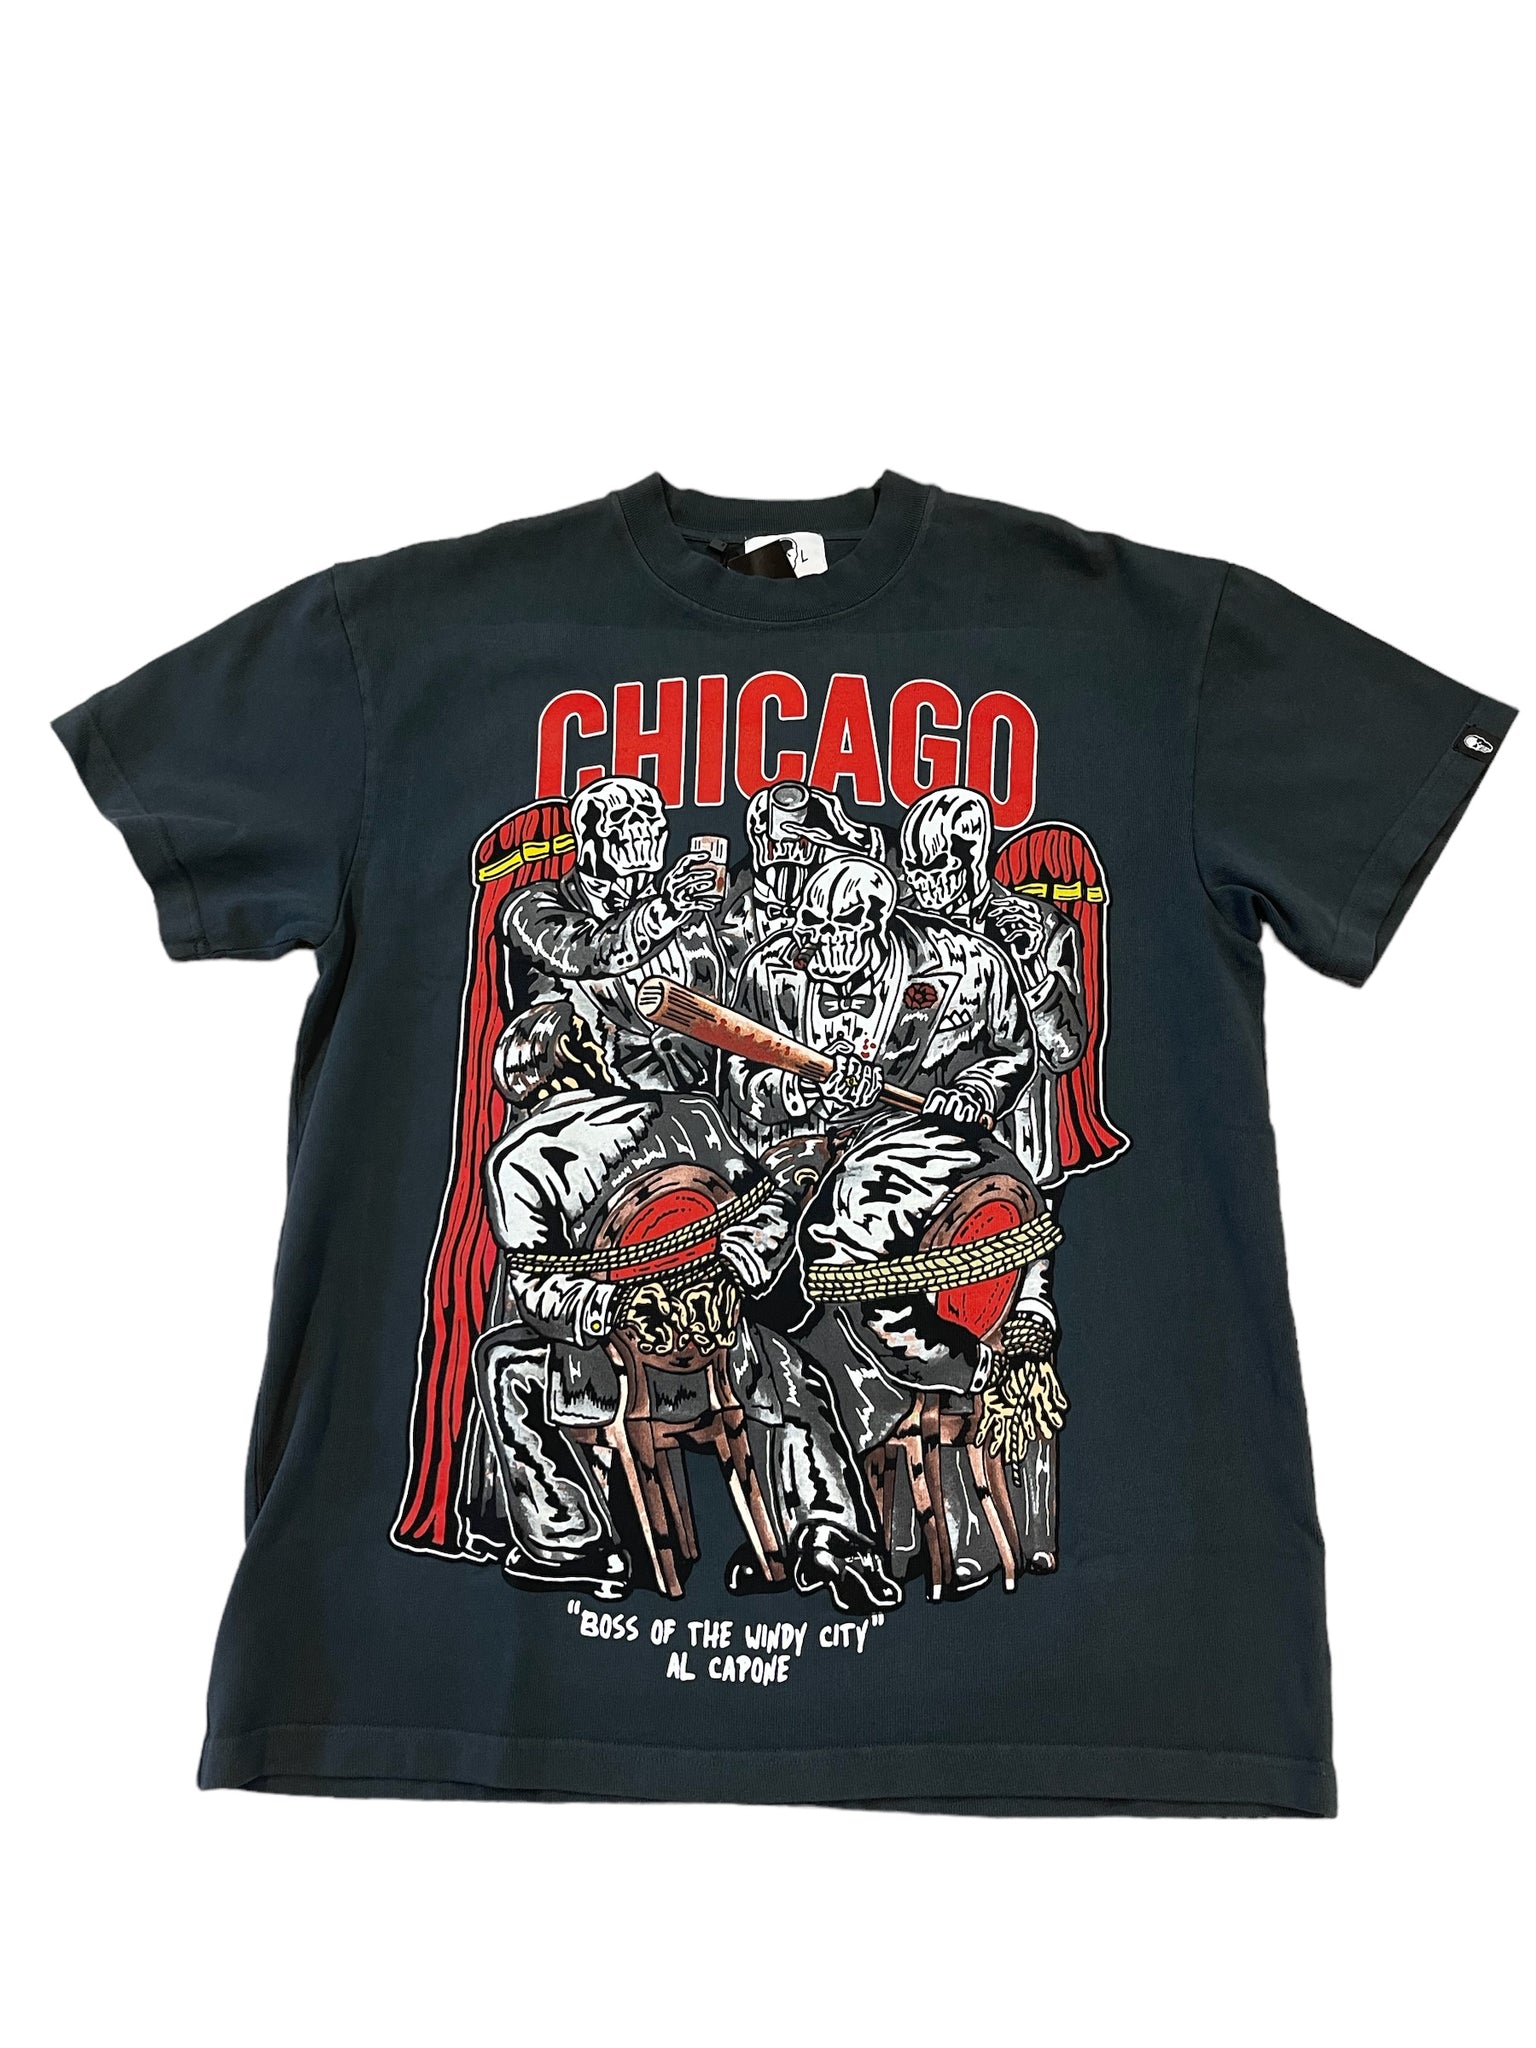 Warren Lotas Tee "Boss of The Windy City Stone-Washed"